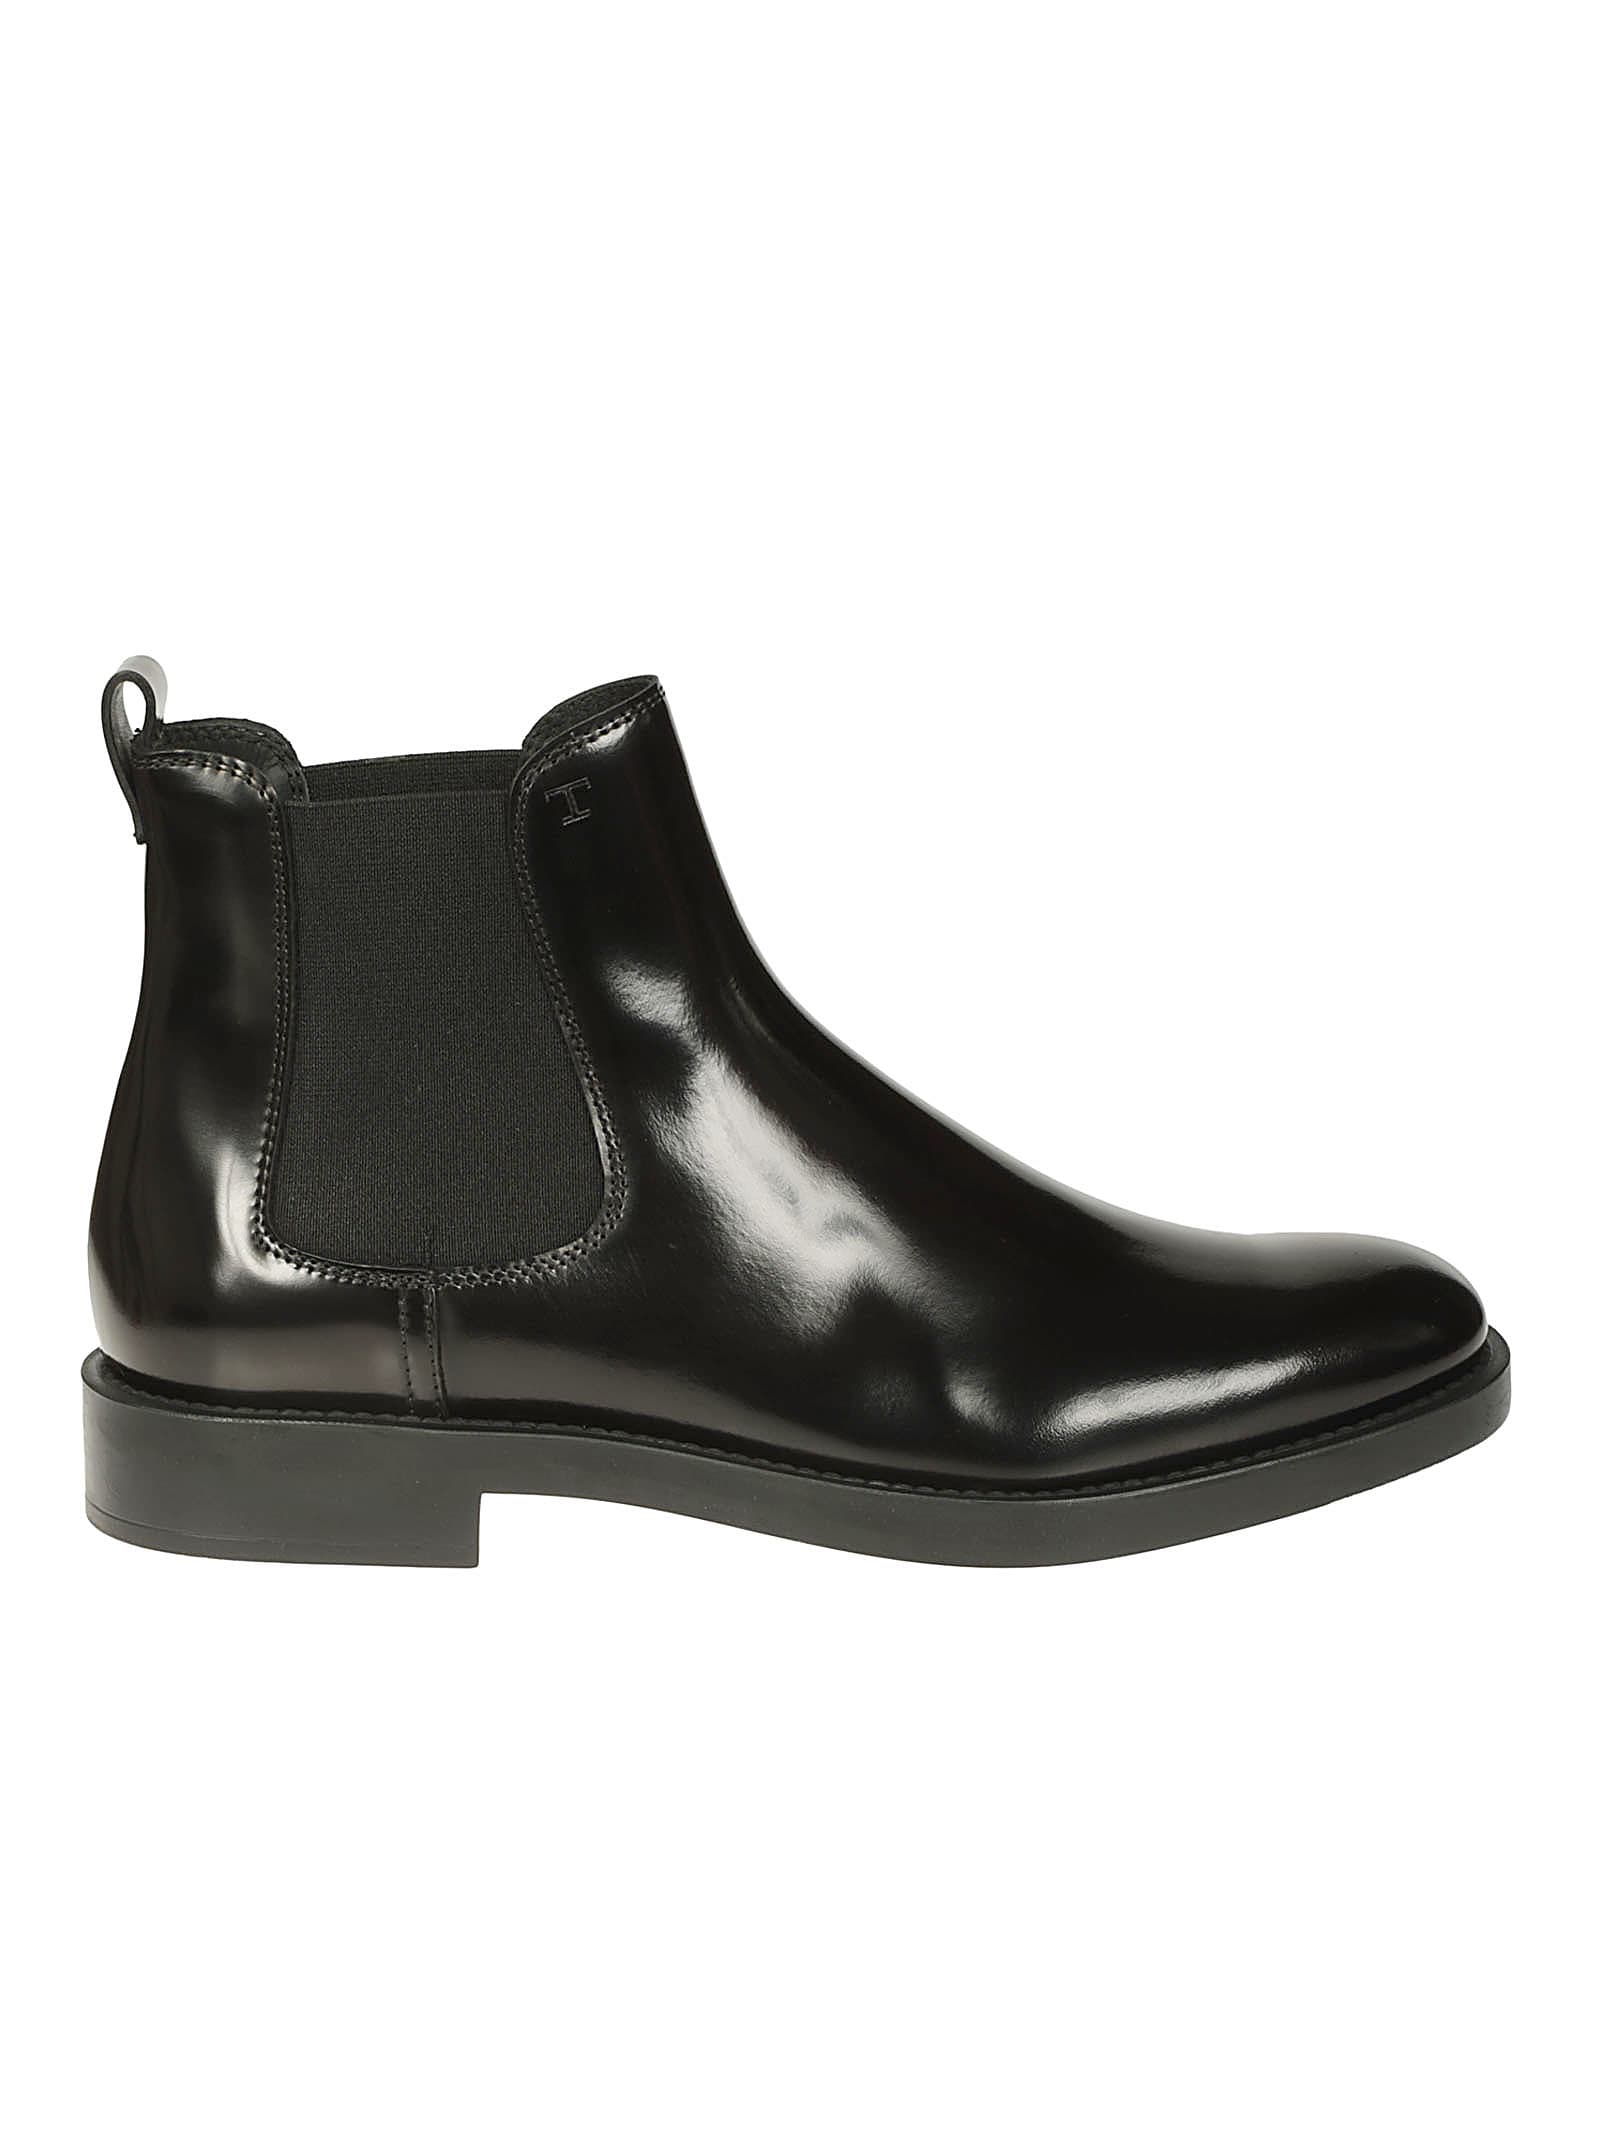 Buy Tods Elasticated Side Panel Ankle Boots online, shop Tods shoes with free shipping